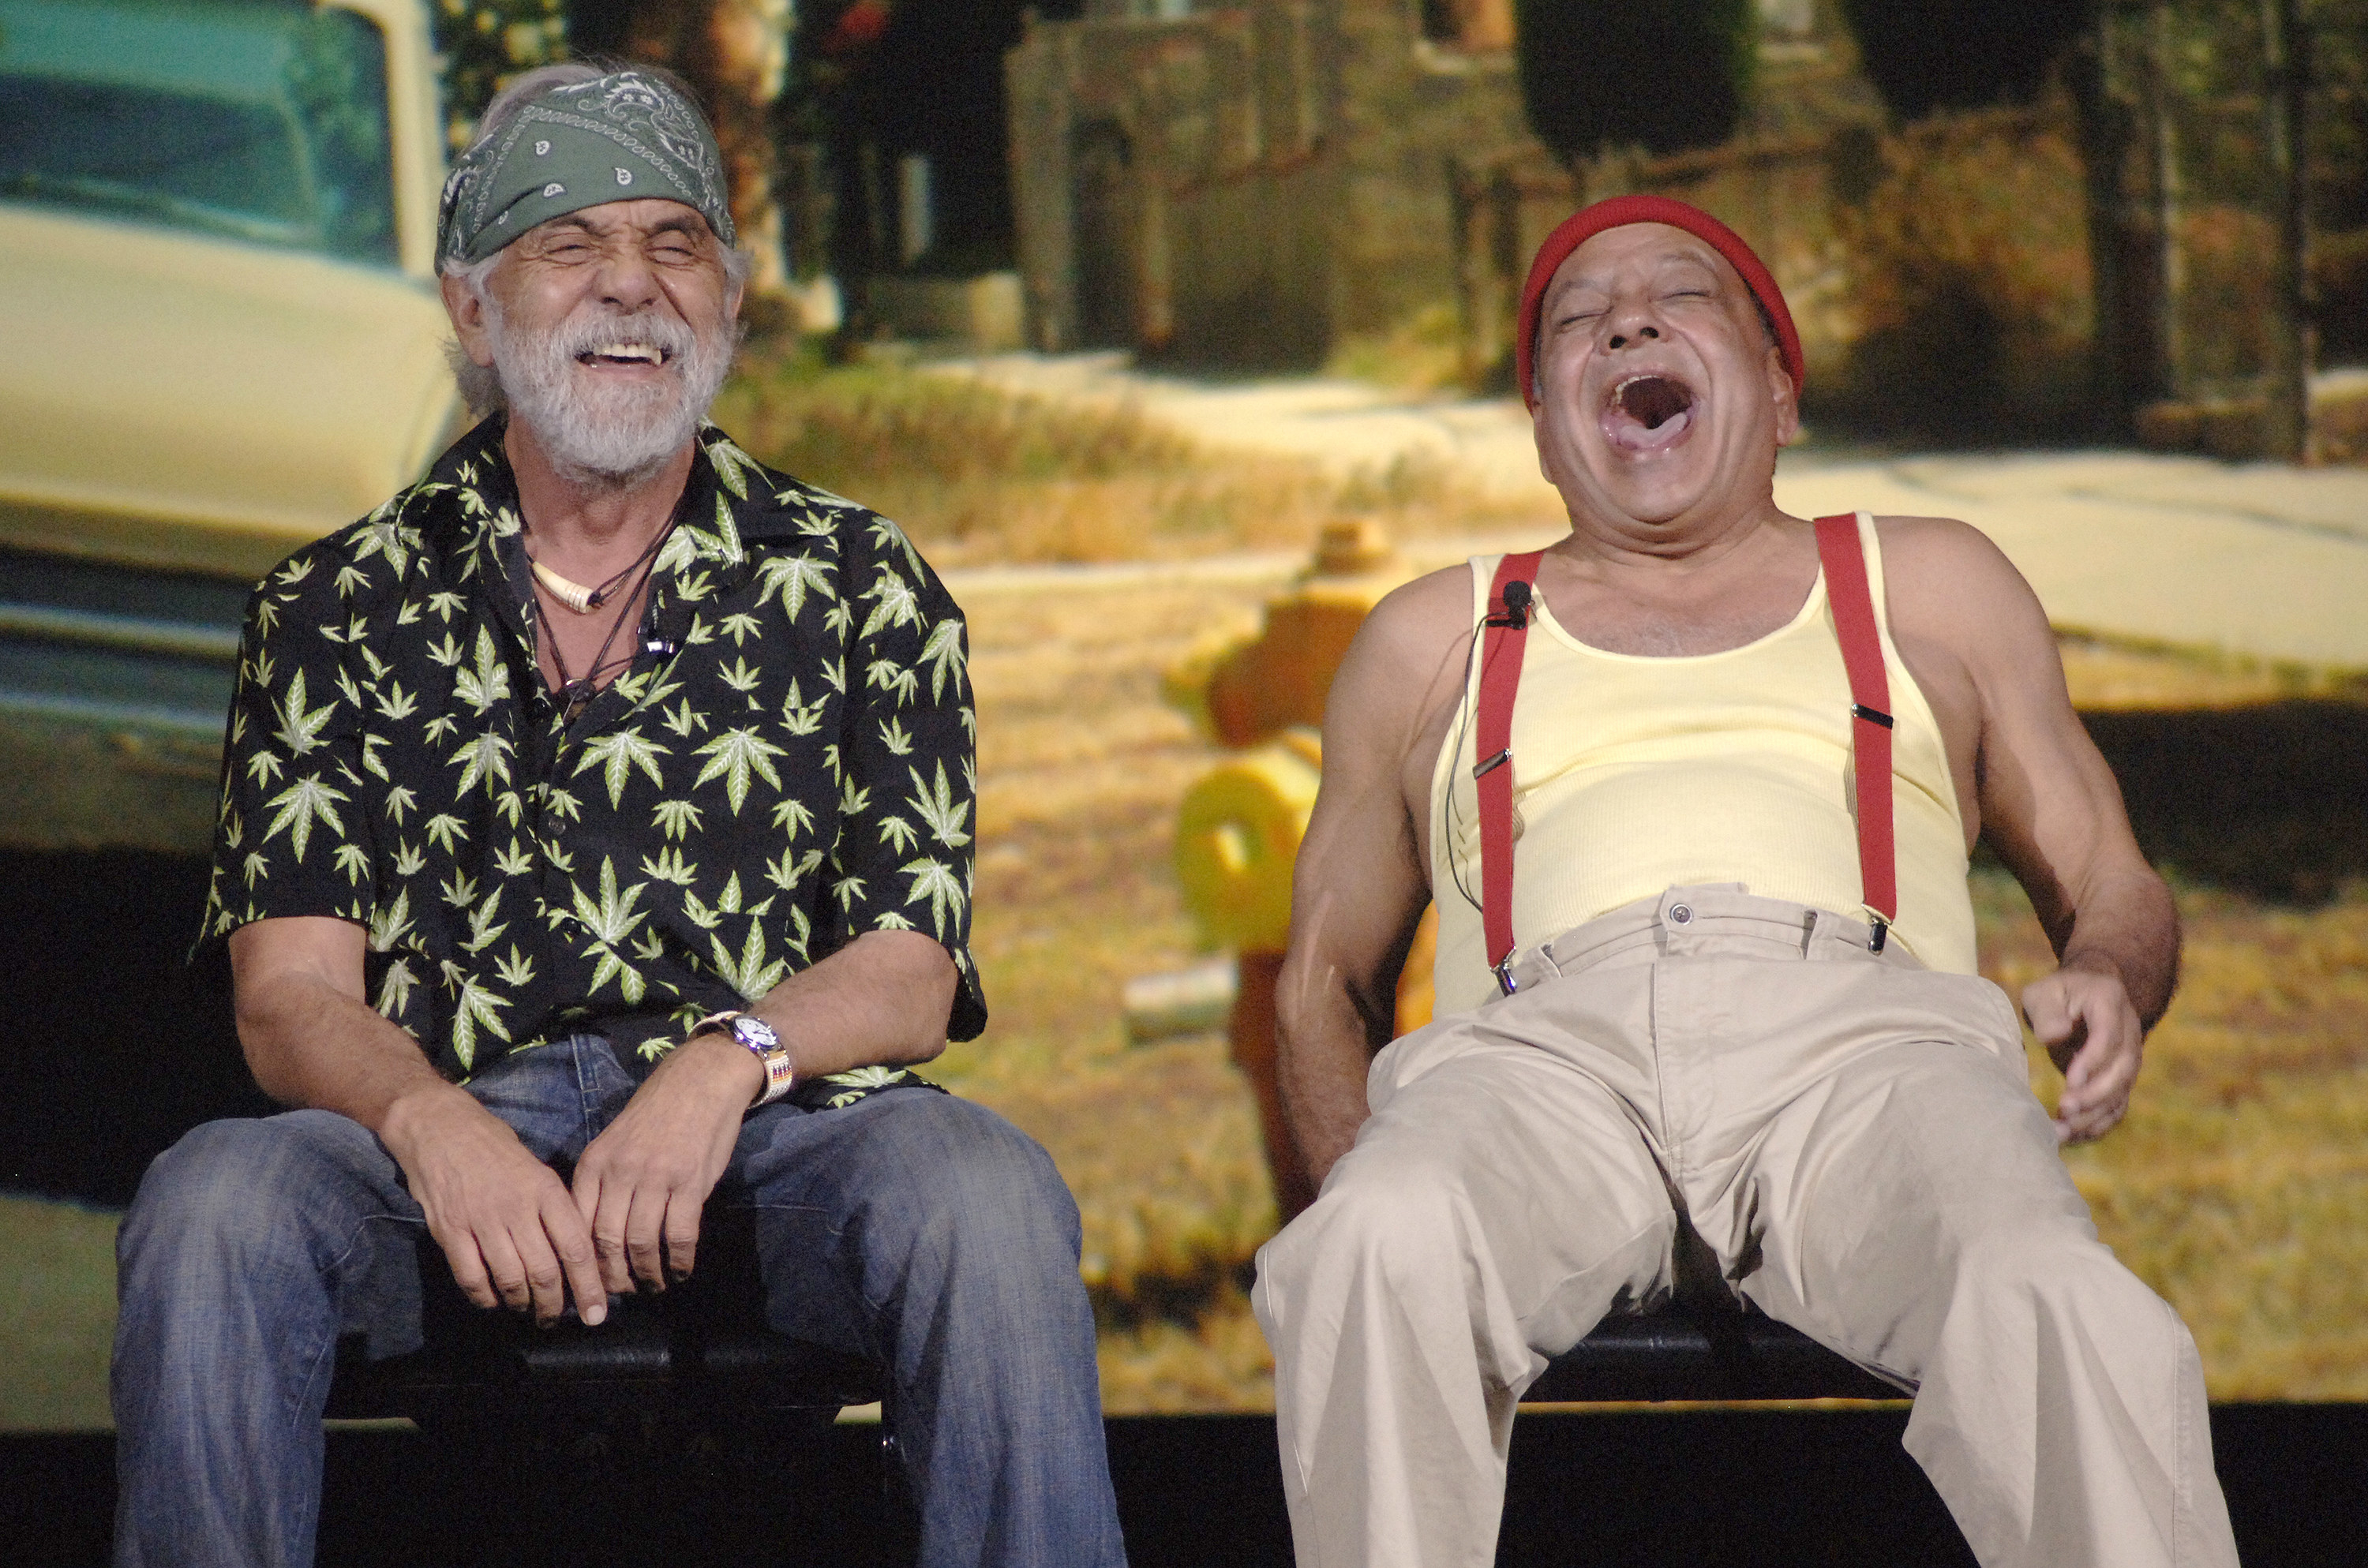 Tommy Chong and Cheech Marin laughing